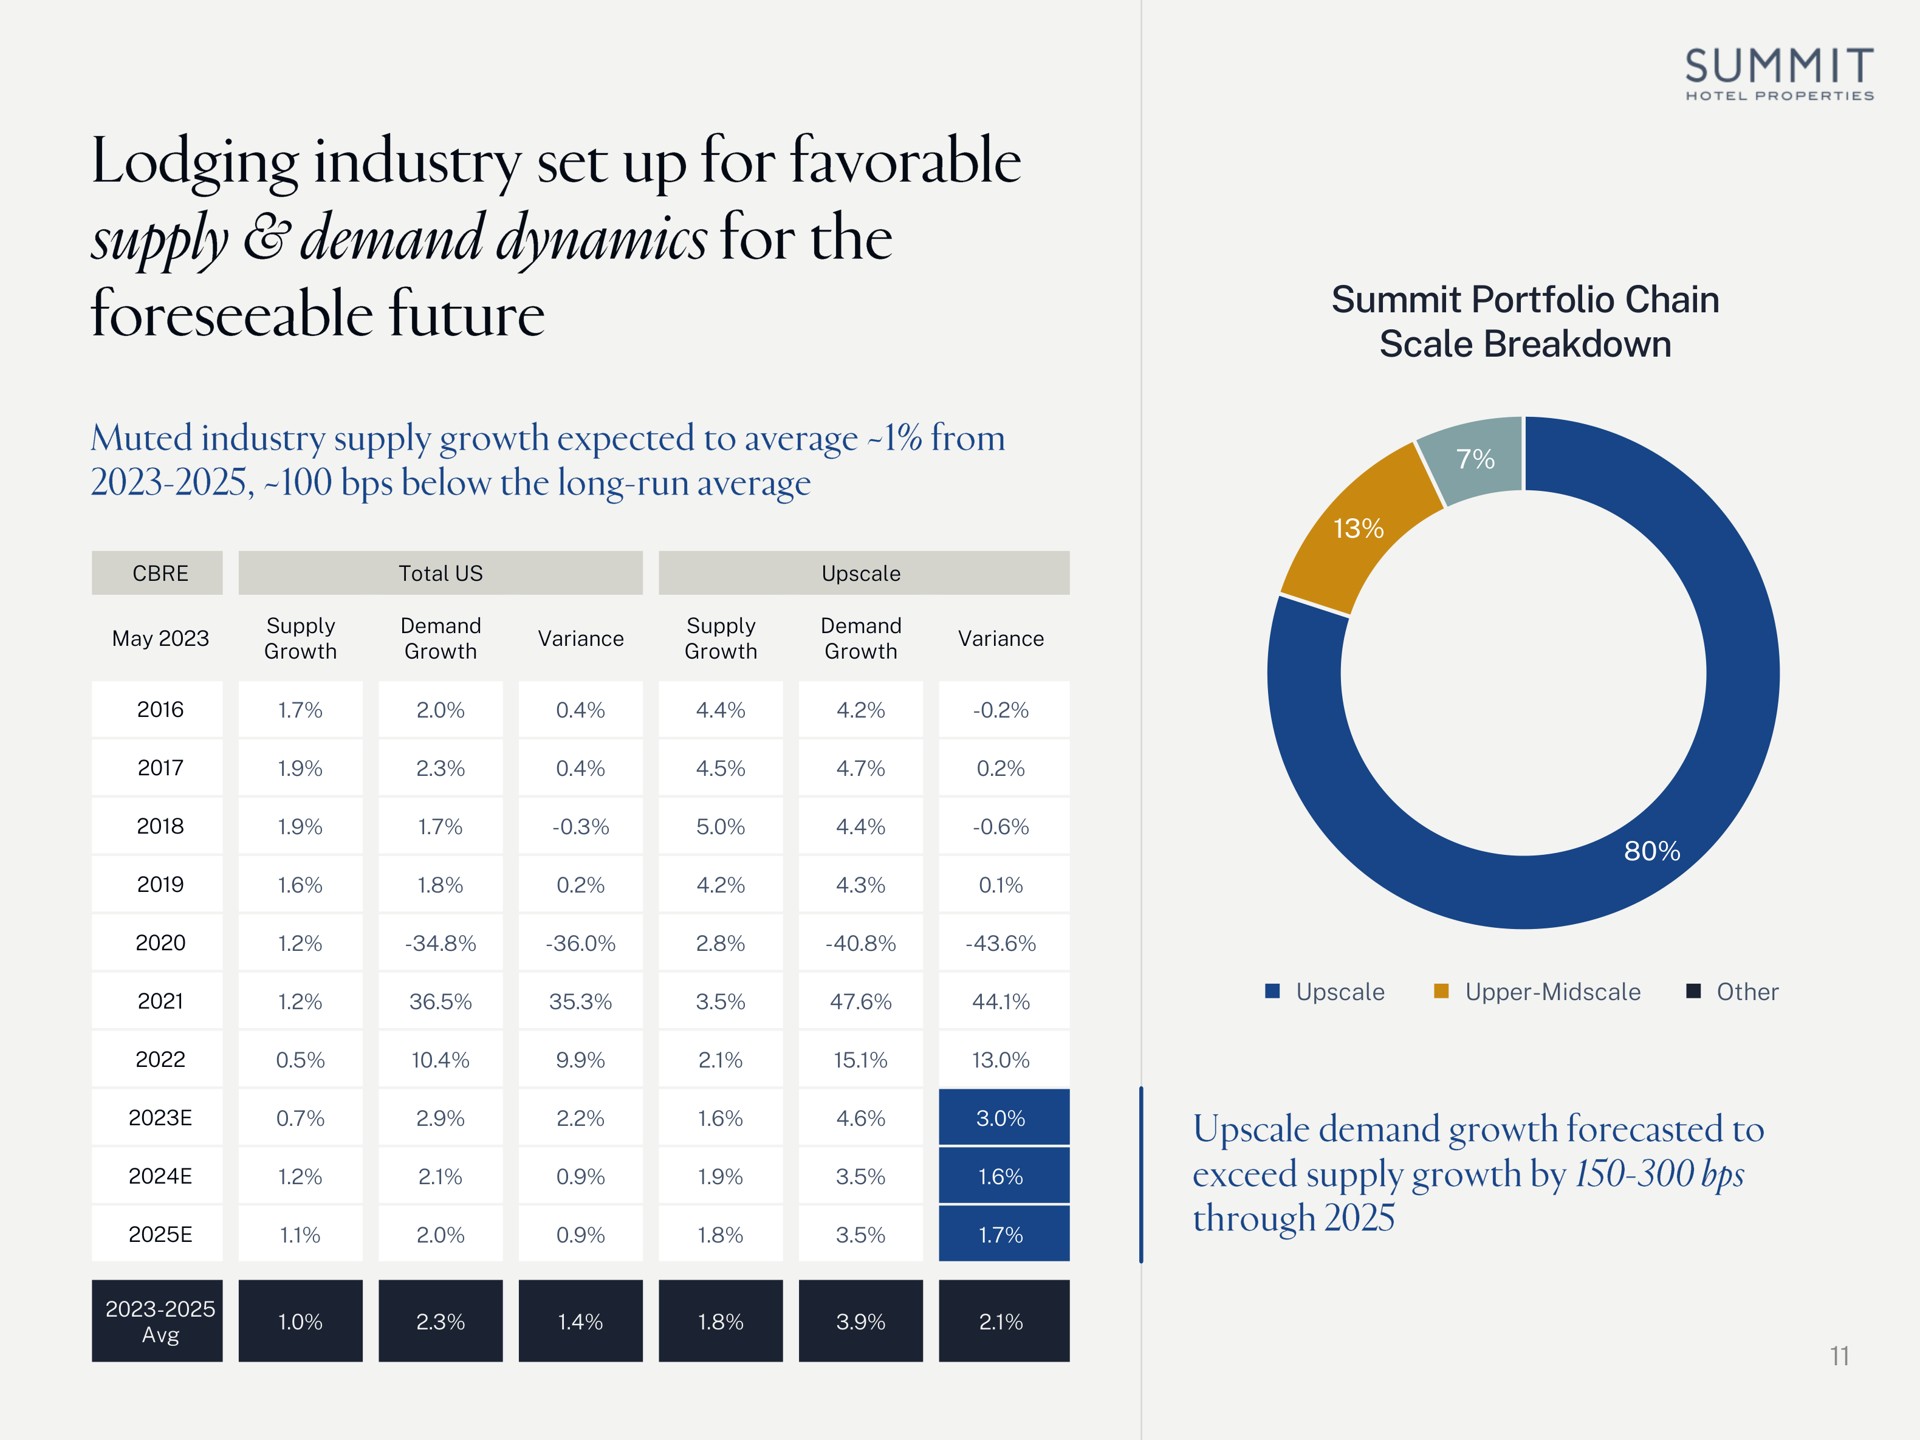 summit portfolio chain scale breakdown upscale upper other lodging industry set up for favorable supply demand dynamics for the foreseeable future may growth growth variance growth growth | Summit Hotel Properties